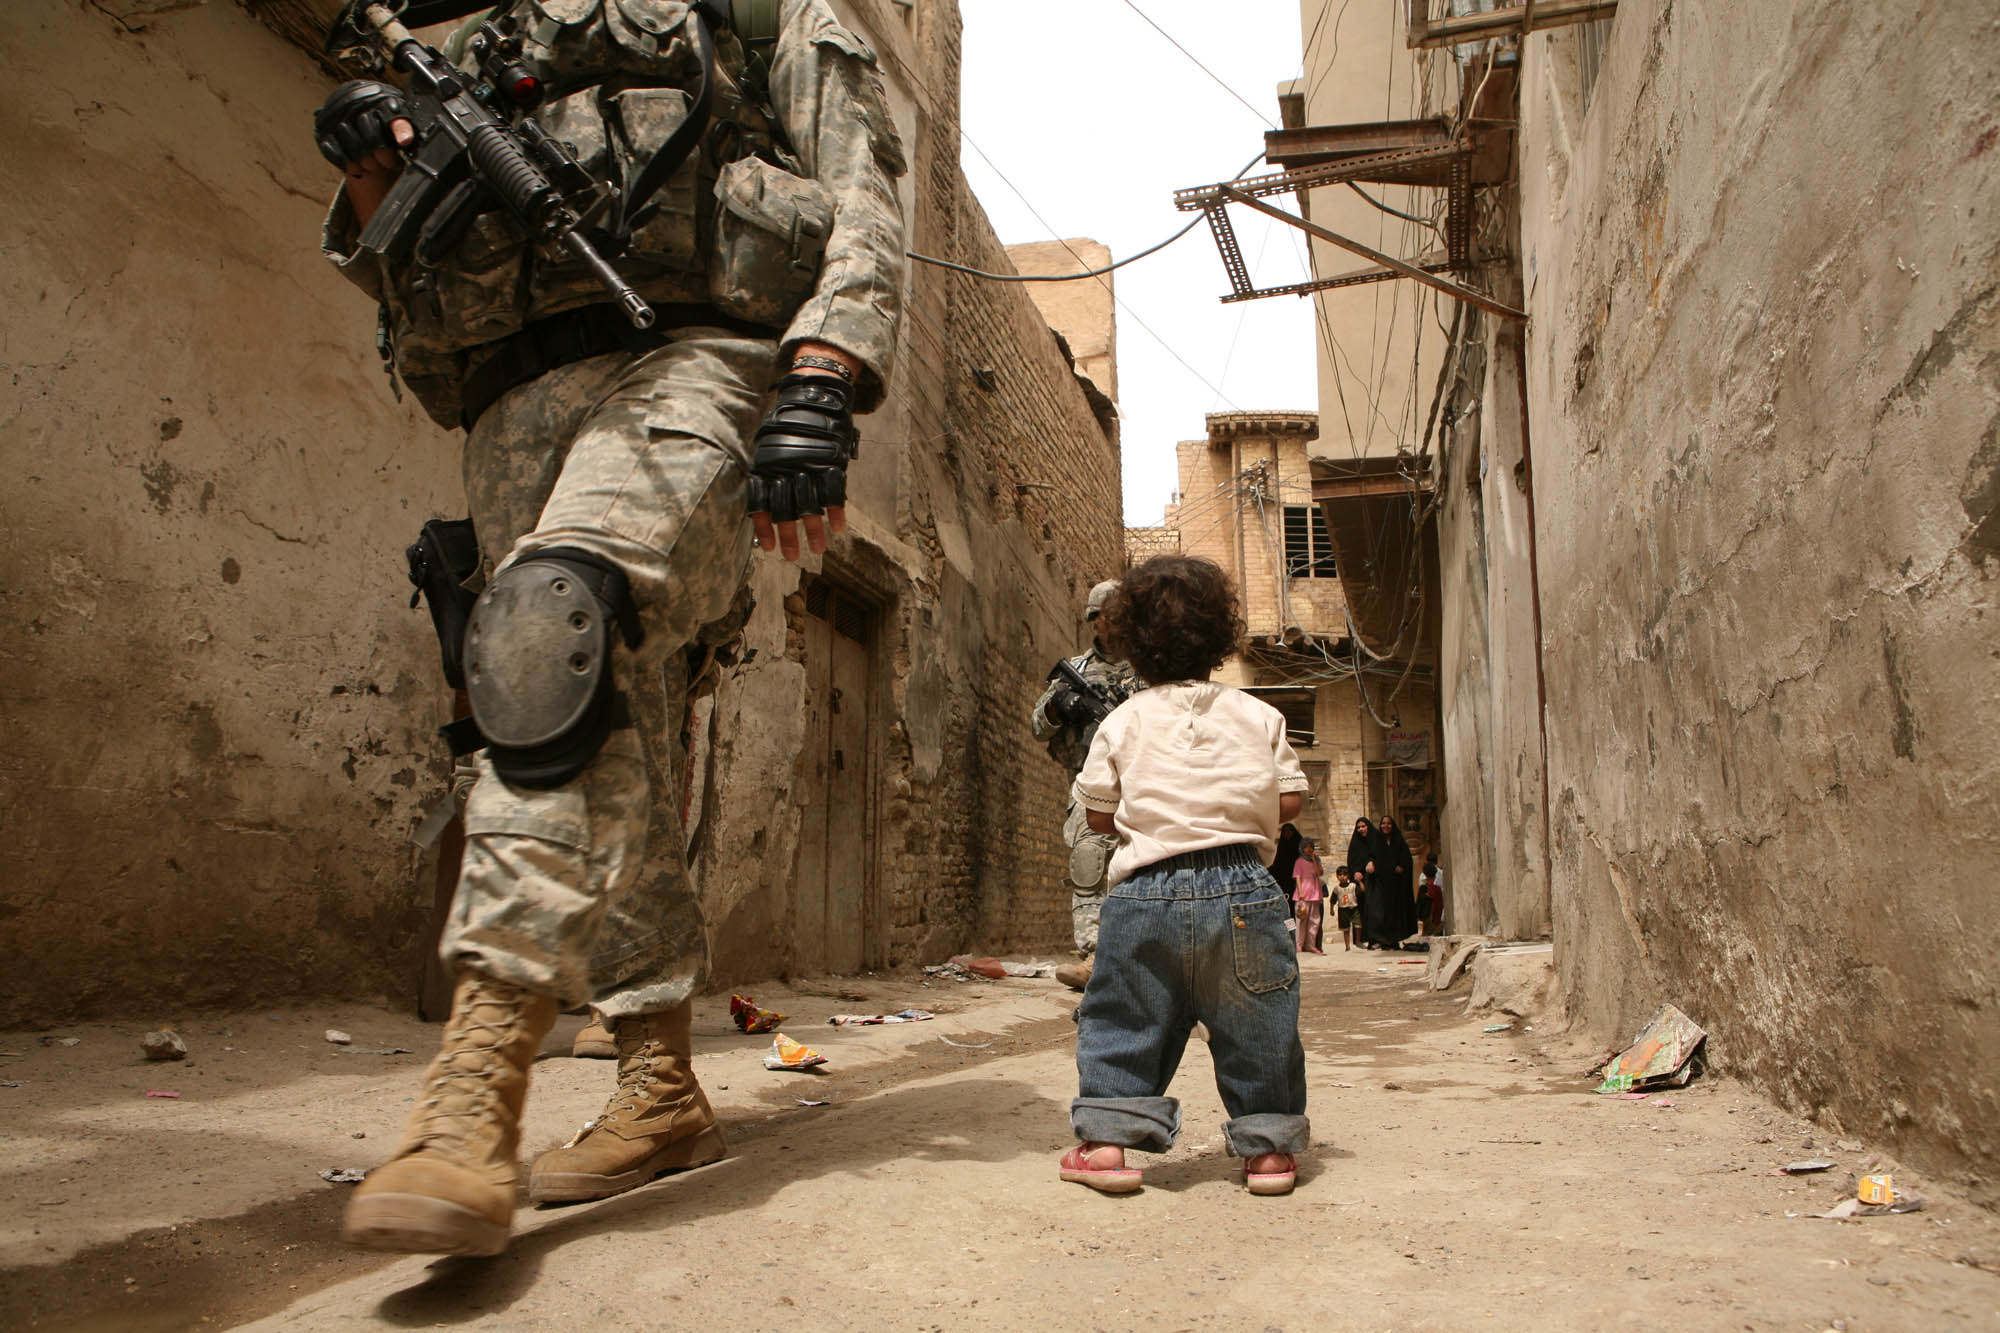 A small child watches US soldiers patrolling the streets of Khadamiya (photo: Michael Kamber)